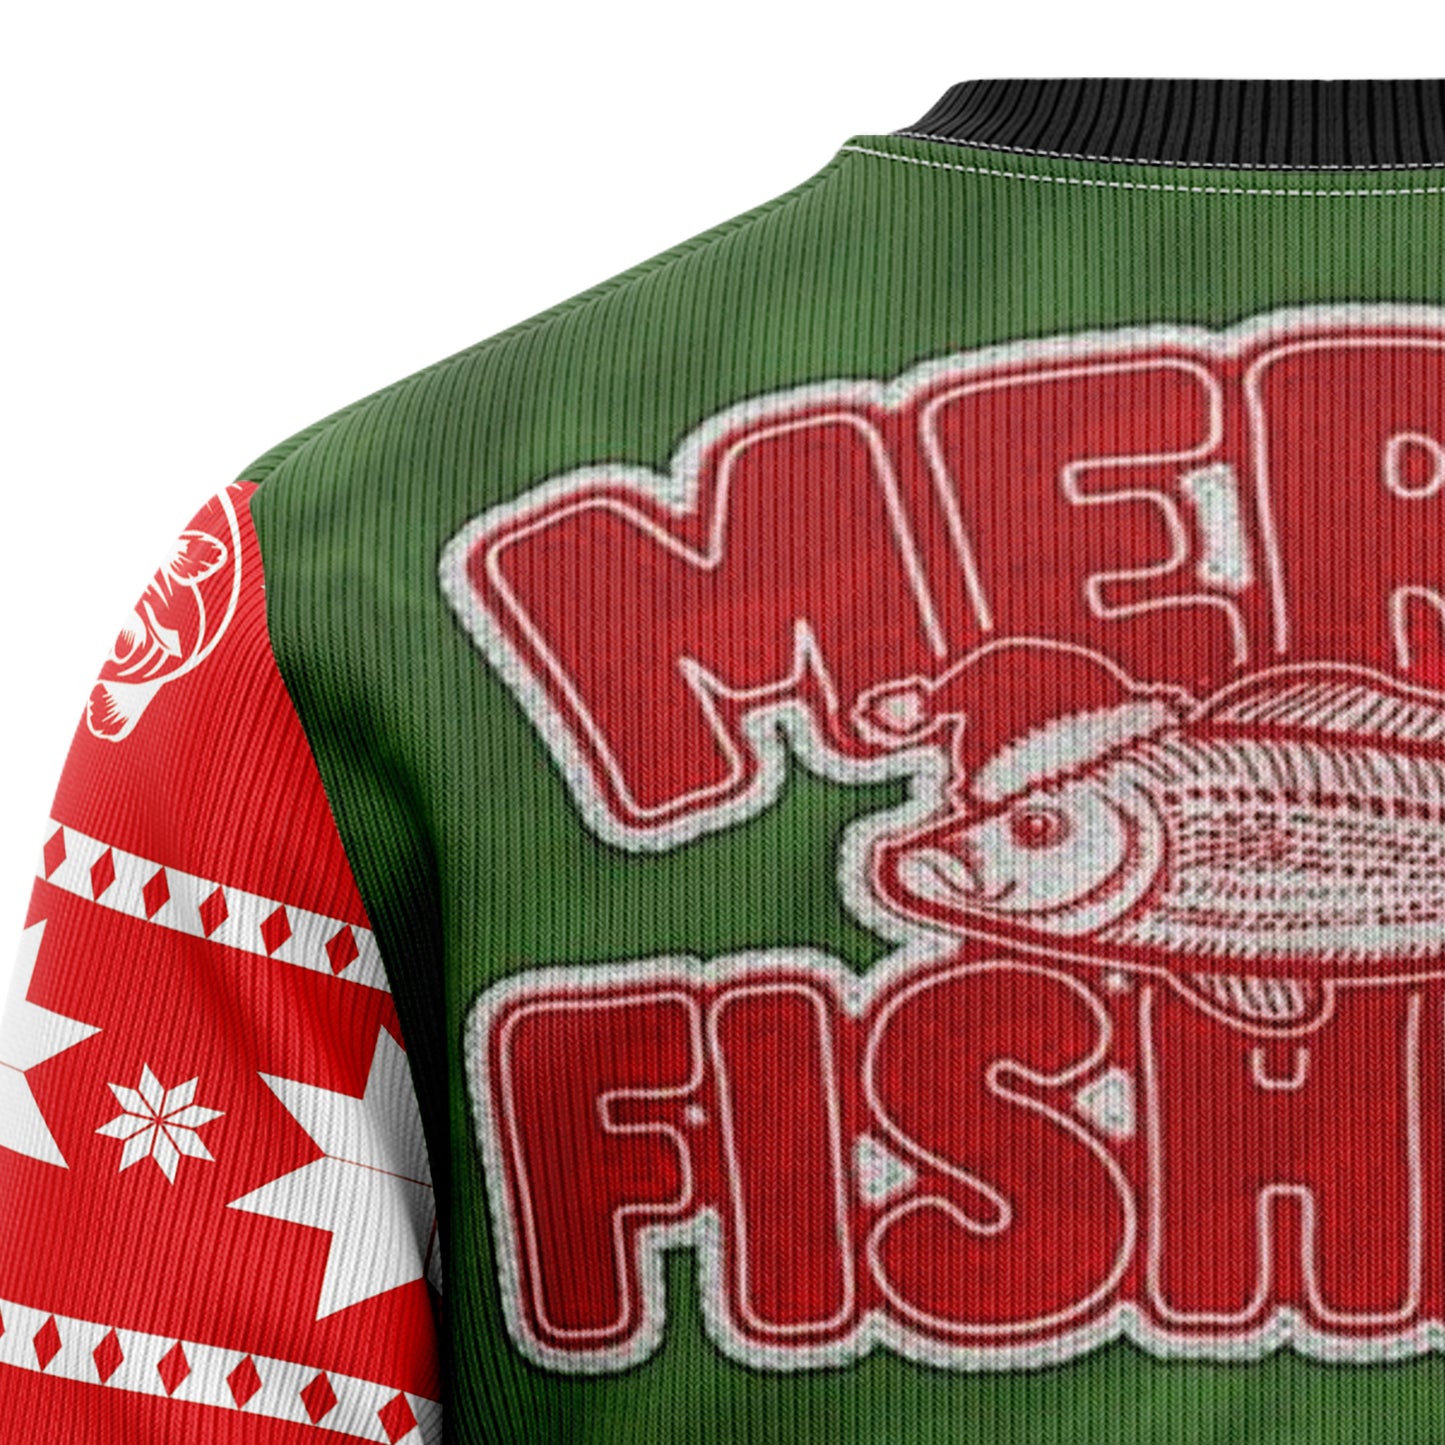 Merry Fishmas HT92507 Ugly Christmas Sweater